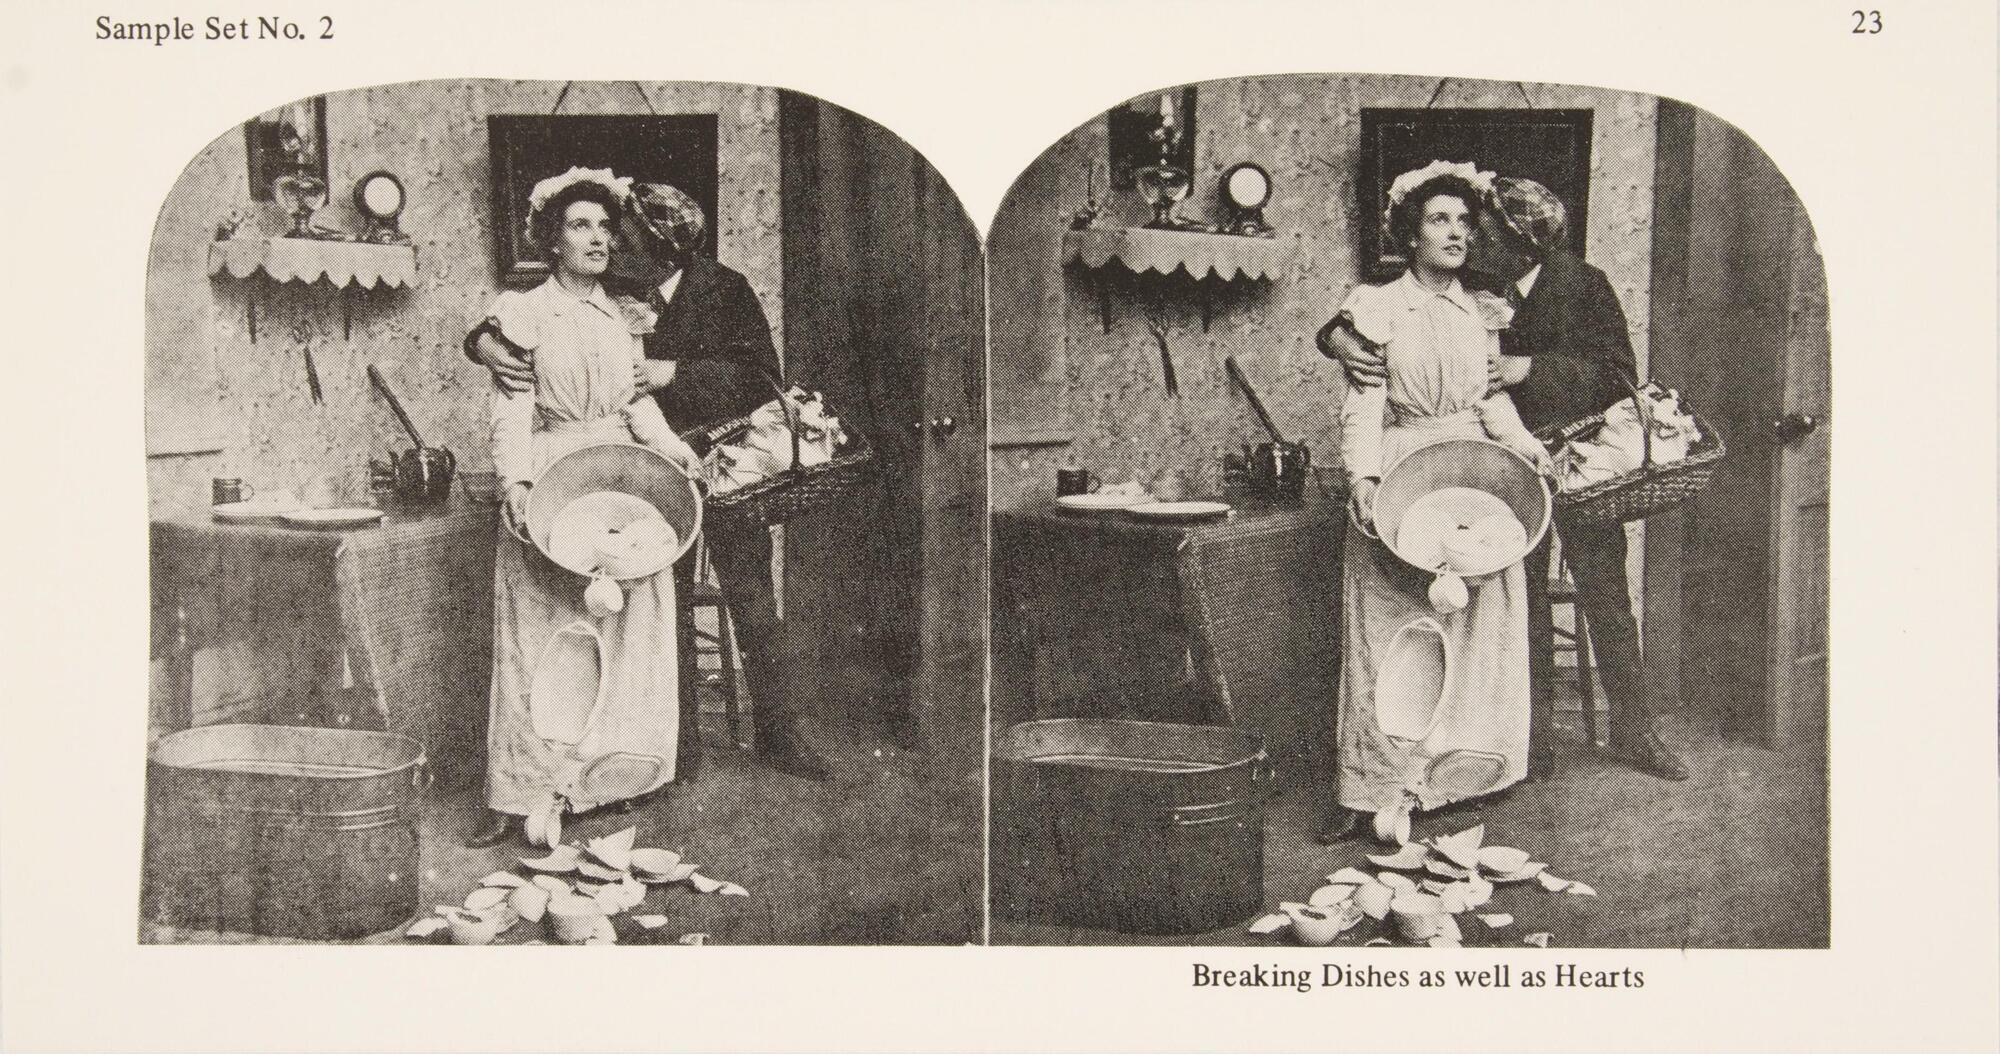 This black and white stereoscopic image features two images of a male and female couple standing in a kitchen. The man is kissing the female on the cheek and has a basket on one arm. The female has a dazed facial expression and is holding a bin that has falling dishes.